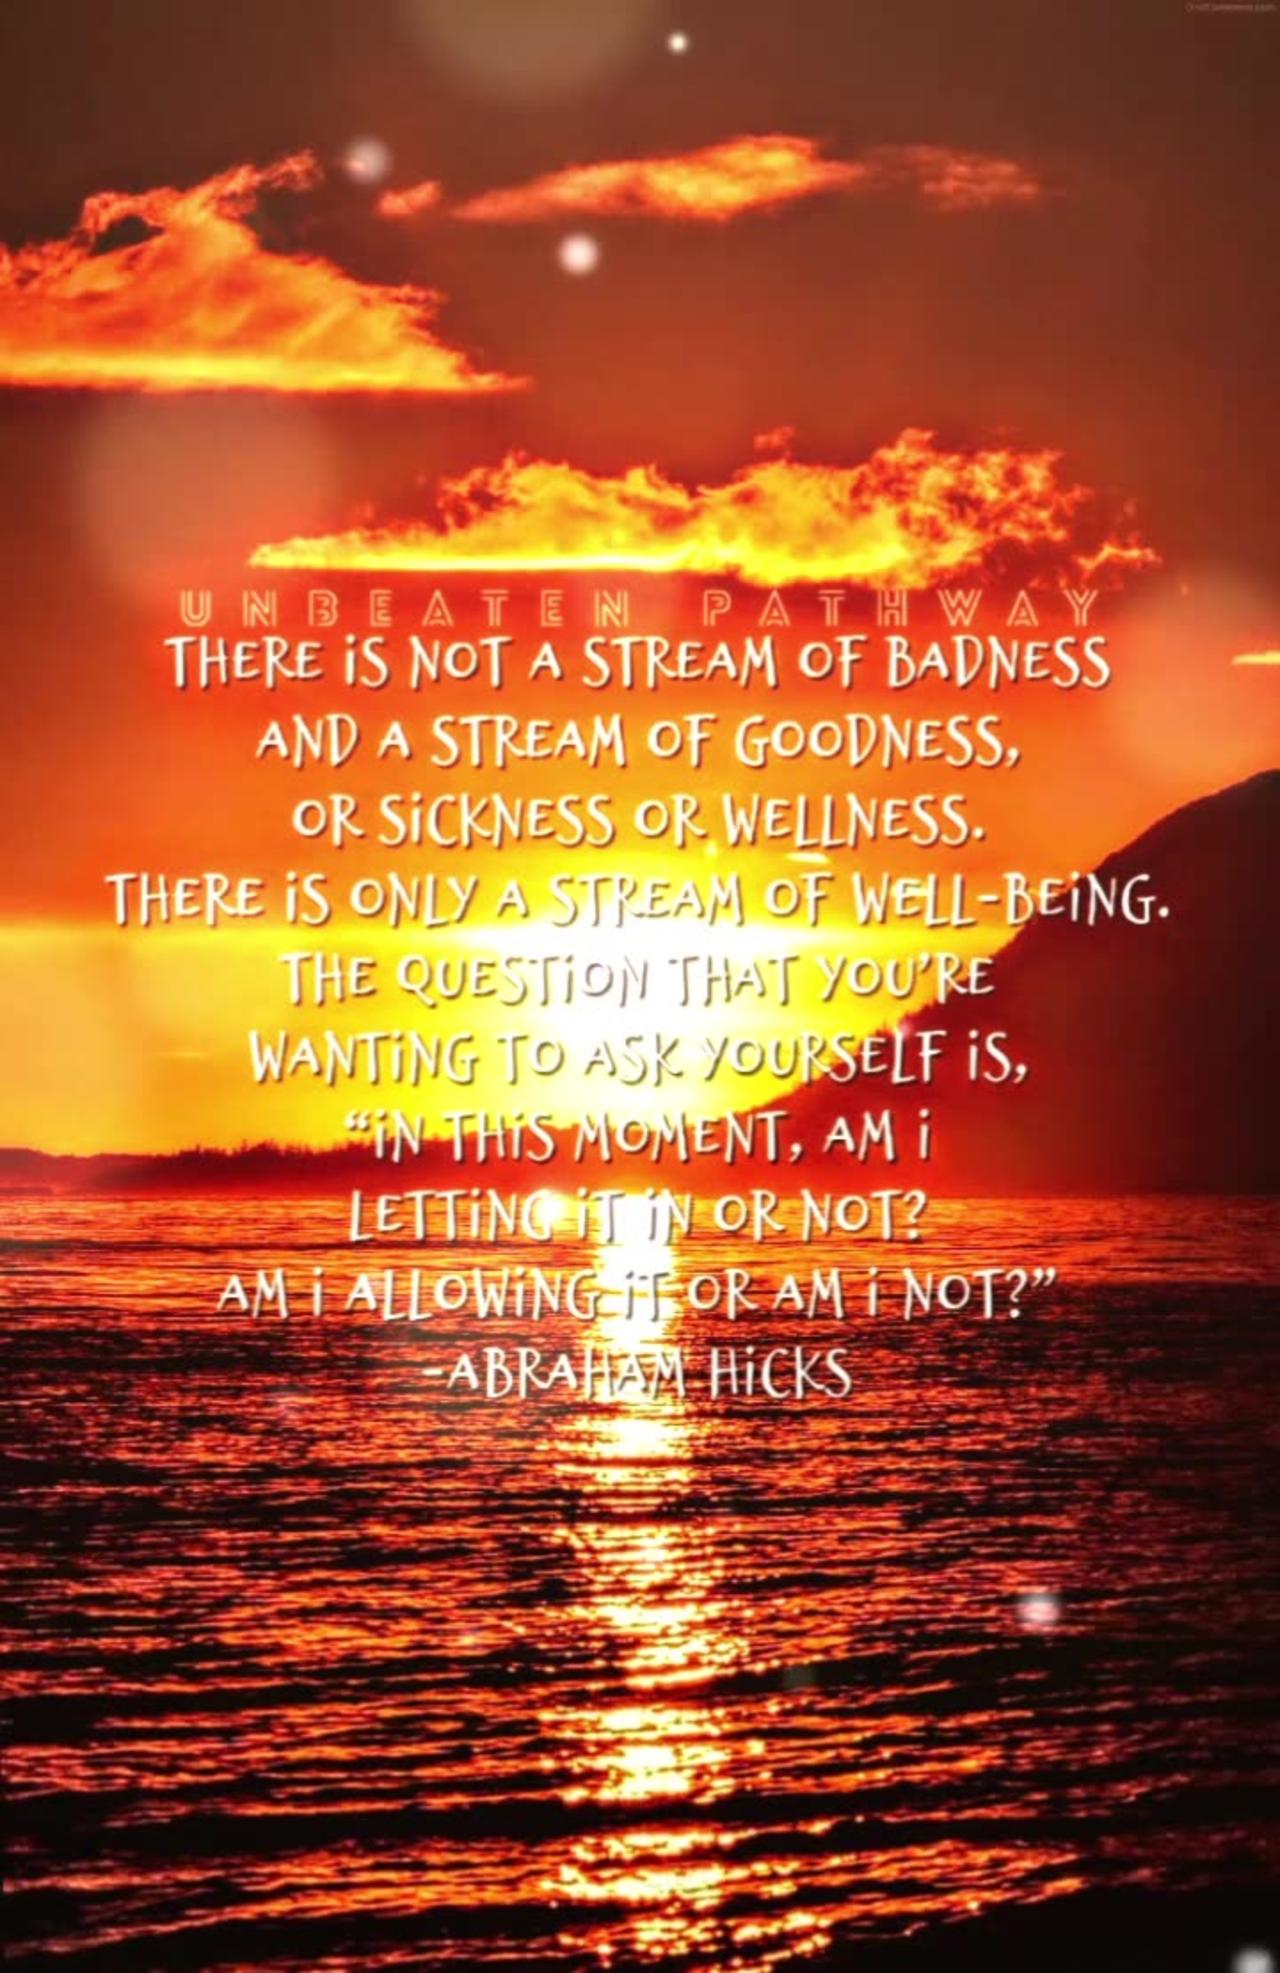 There is not a stream of badness and a stream of goodness, or sickness or wellness...